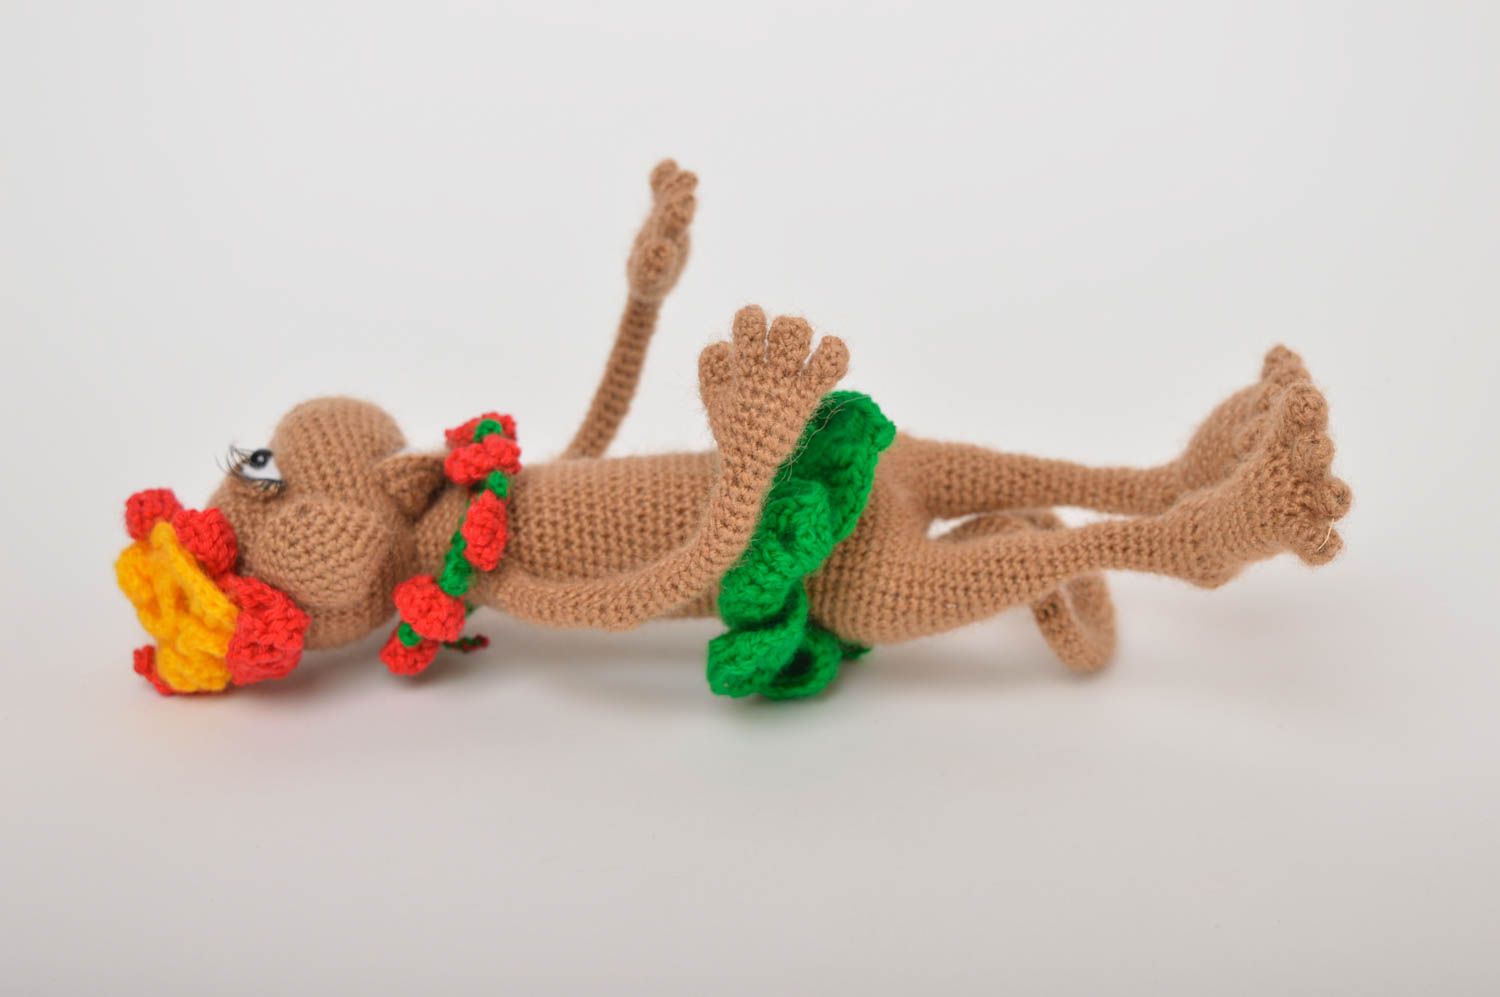 10 inches knitted stuffed monkey toy in brown, red, and green colors photo 4